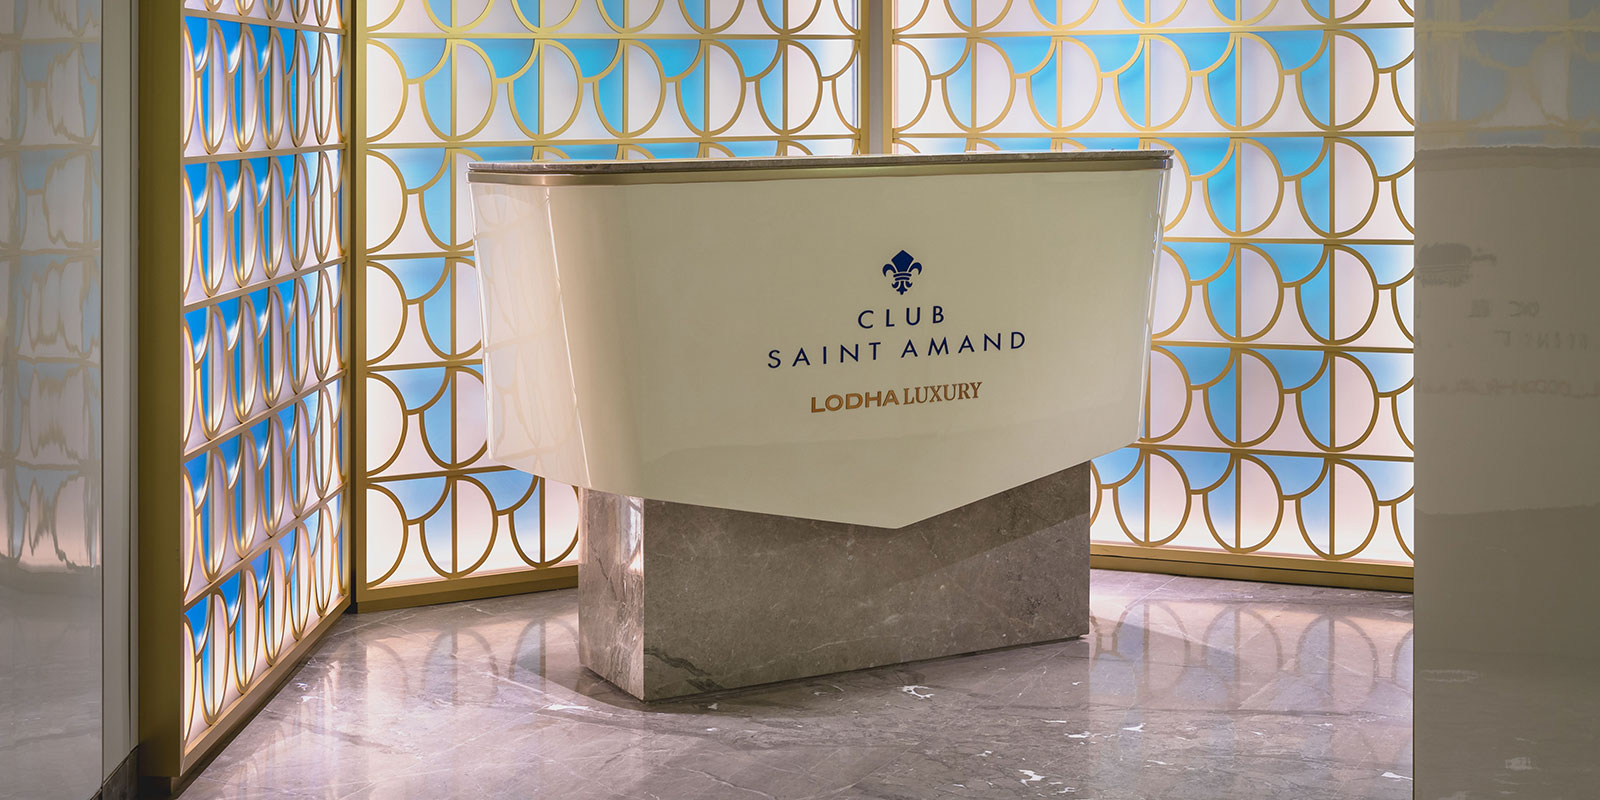 Welcome to Club Saint Amand – Mumbai’s most exclusive private members club in the heart of South Mumbai. Exclusive to Lodha Ciel residents, the club caters to your rejuvenation, well-being, entertainment and keeps you in touch with your business as well. Bespoke luxury and away from the prying eyes. It’s your private club right at home. 